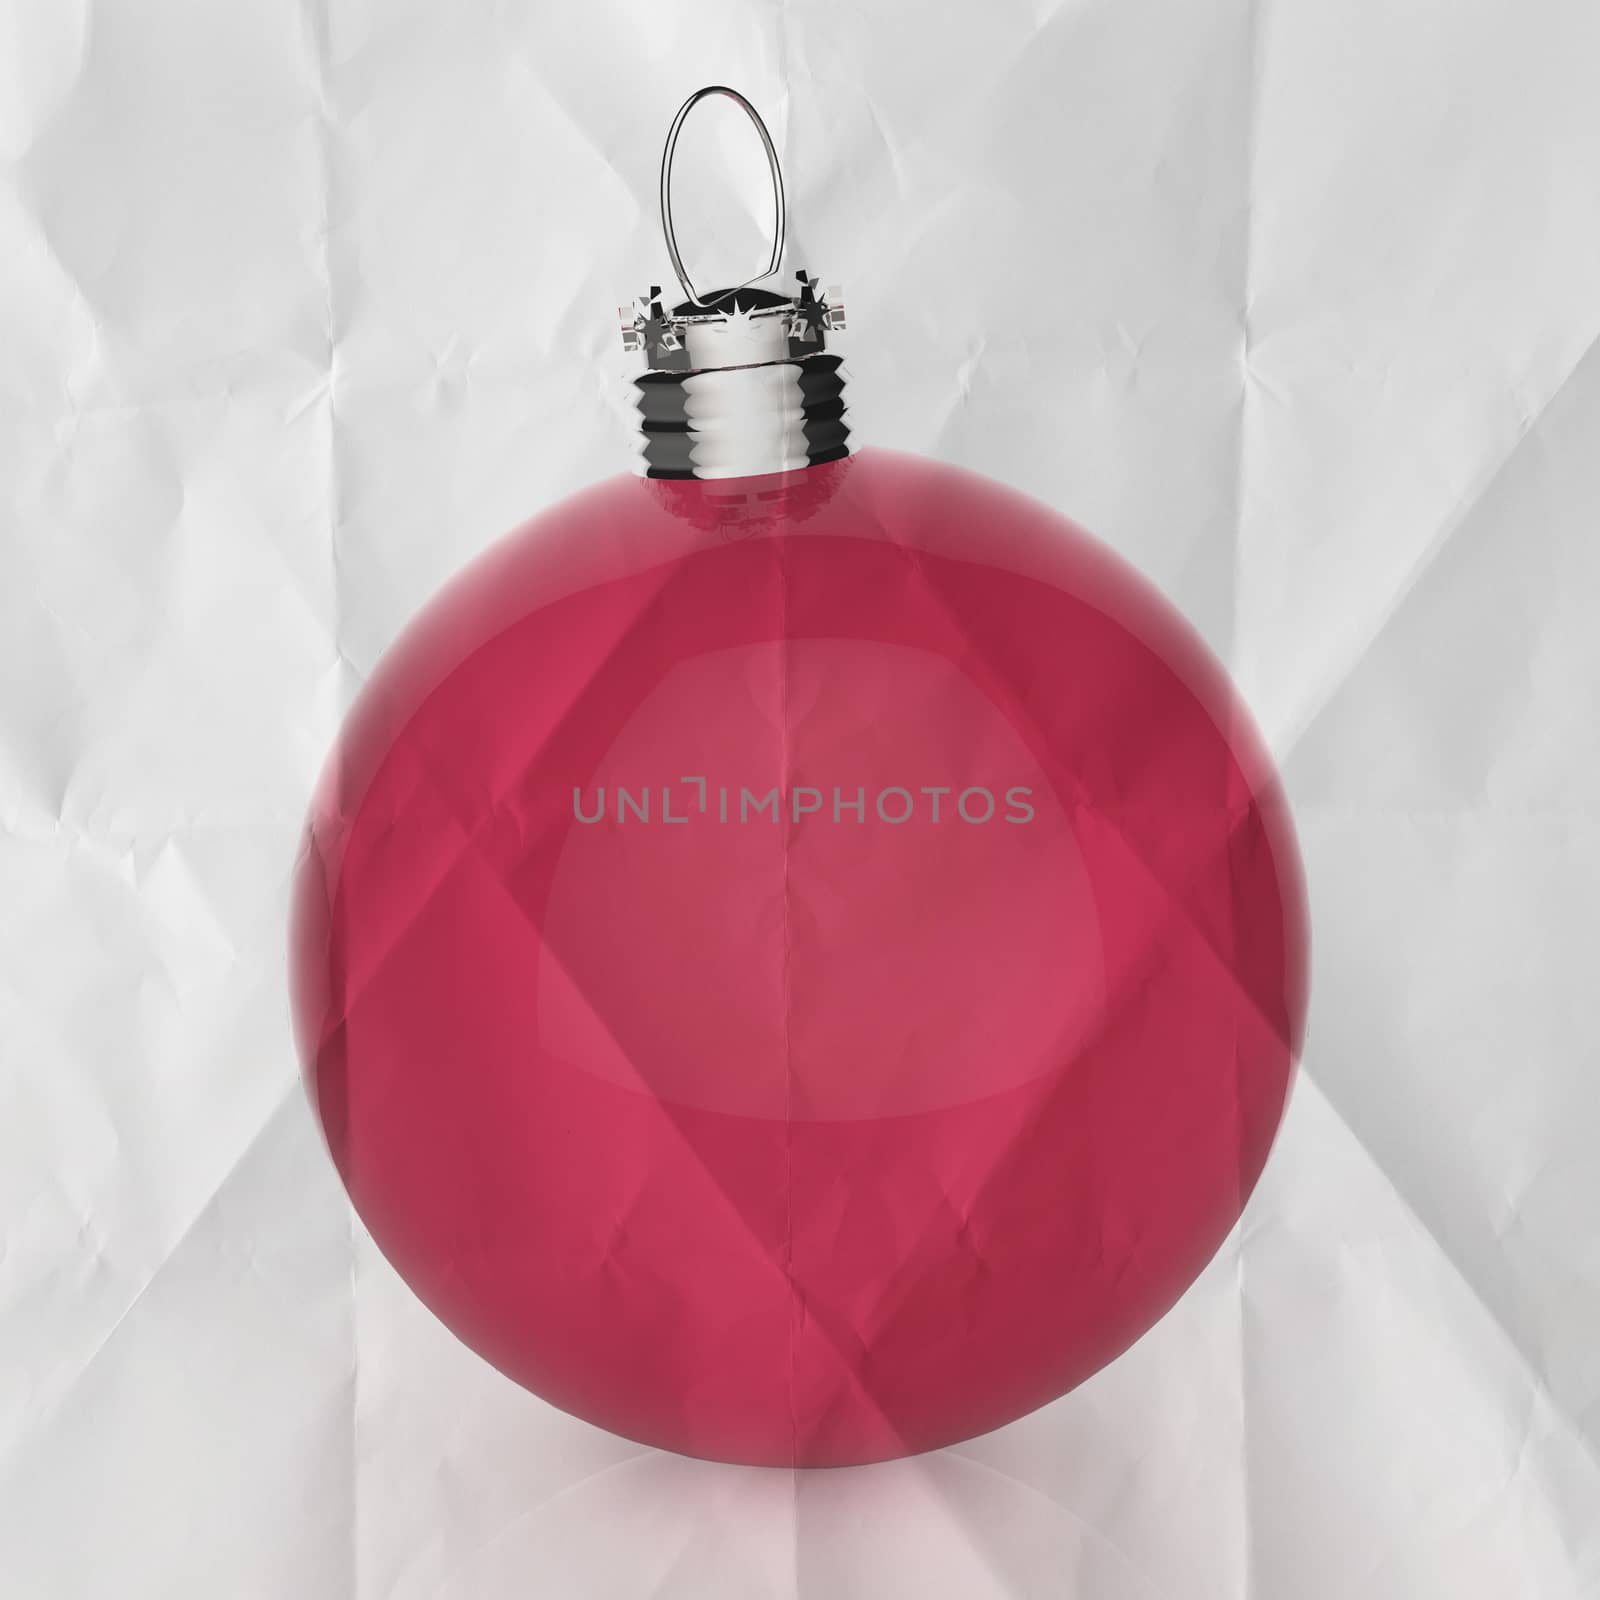 Empty Christmas ball ornament on crumpled paper background